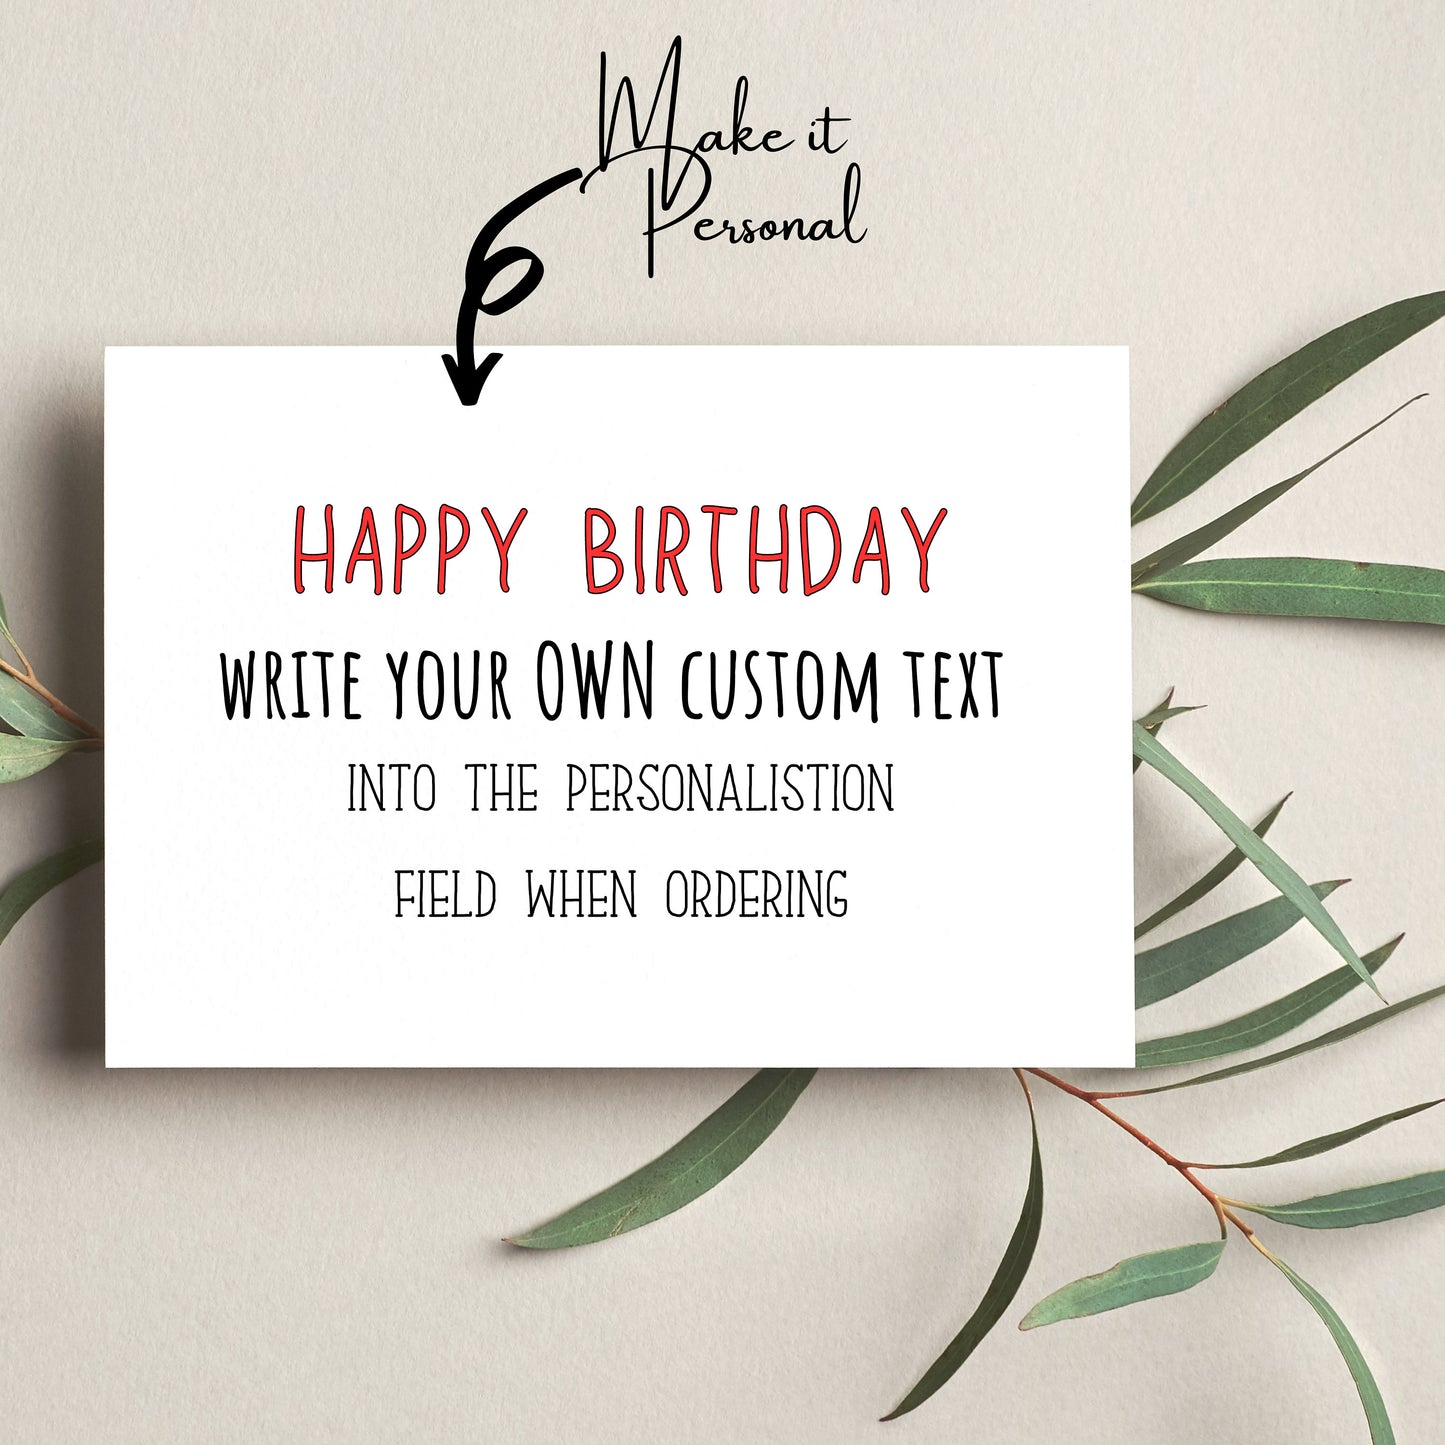 Custom Text Card: Fun Font, Great For Family!